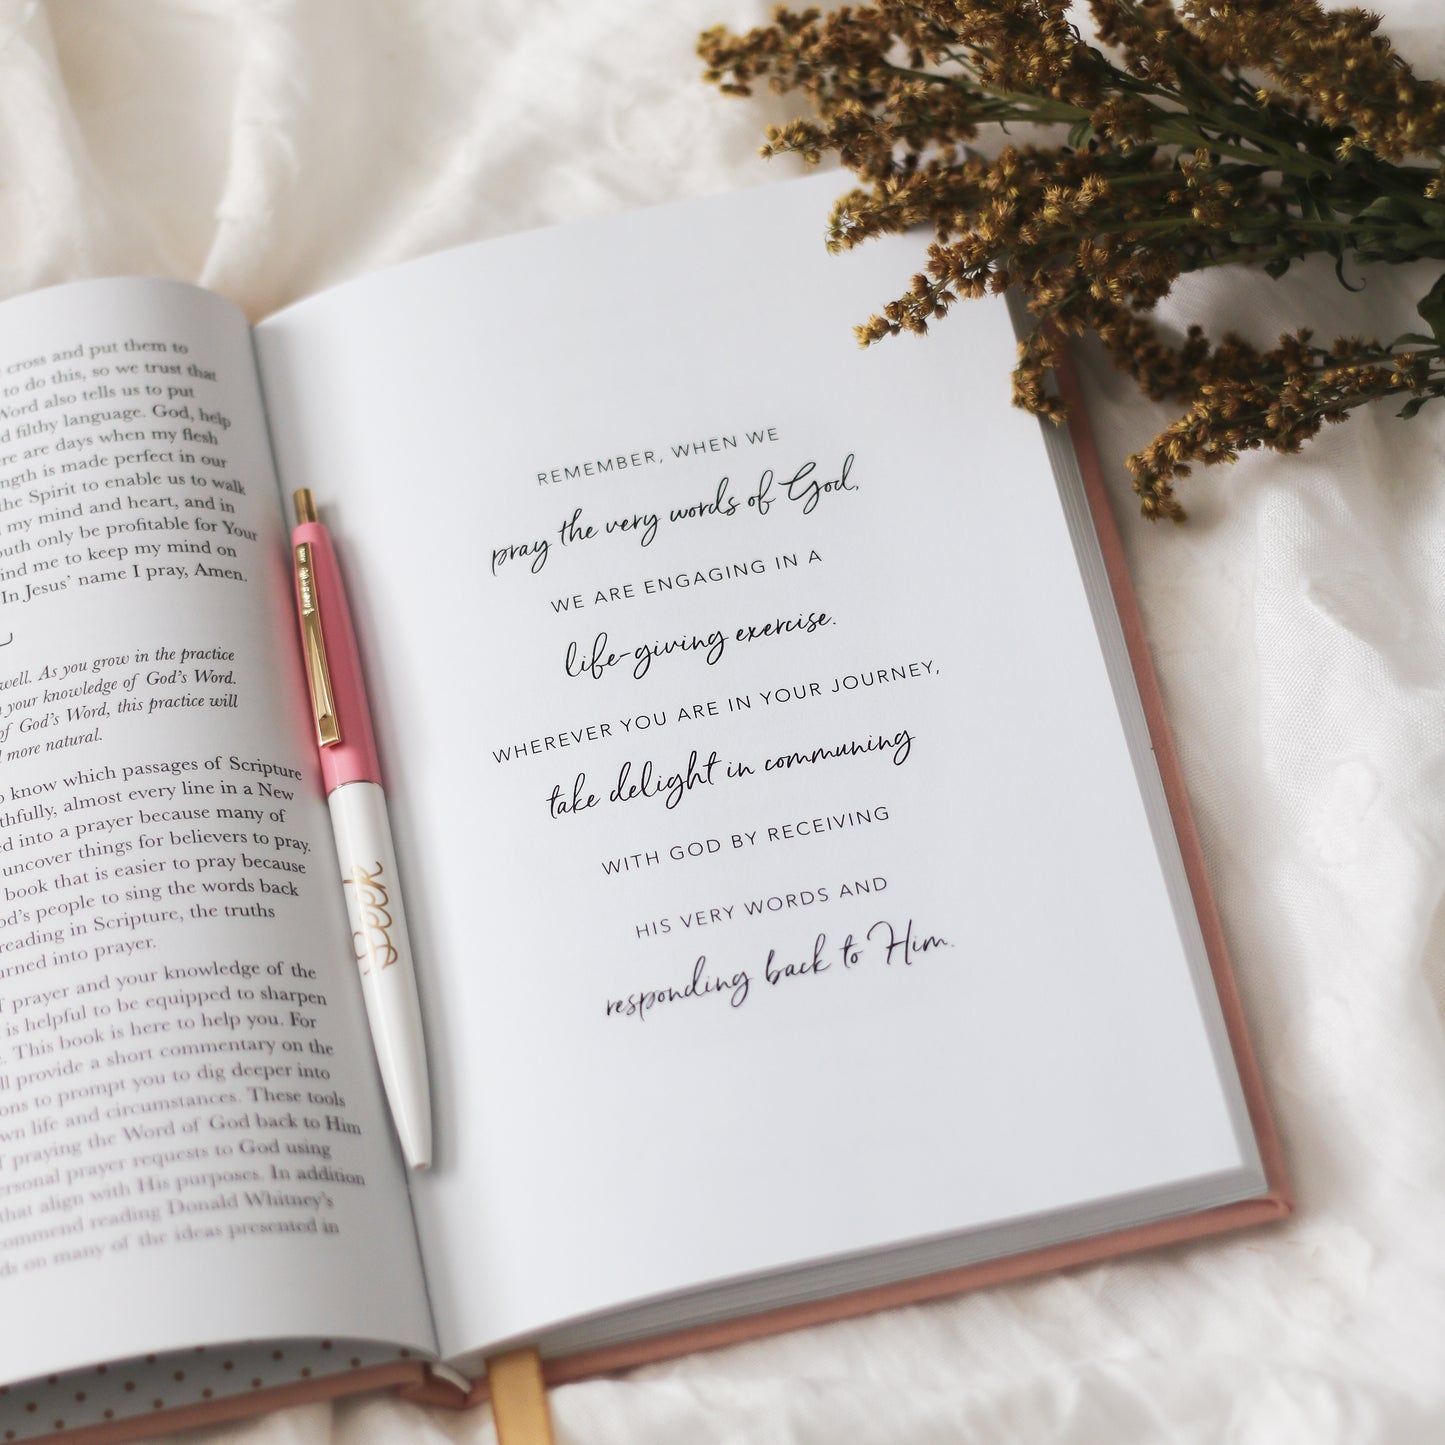 All Things New  - Praying Scripture Journal